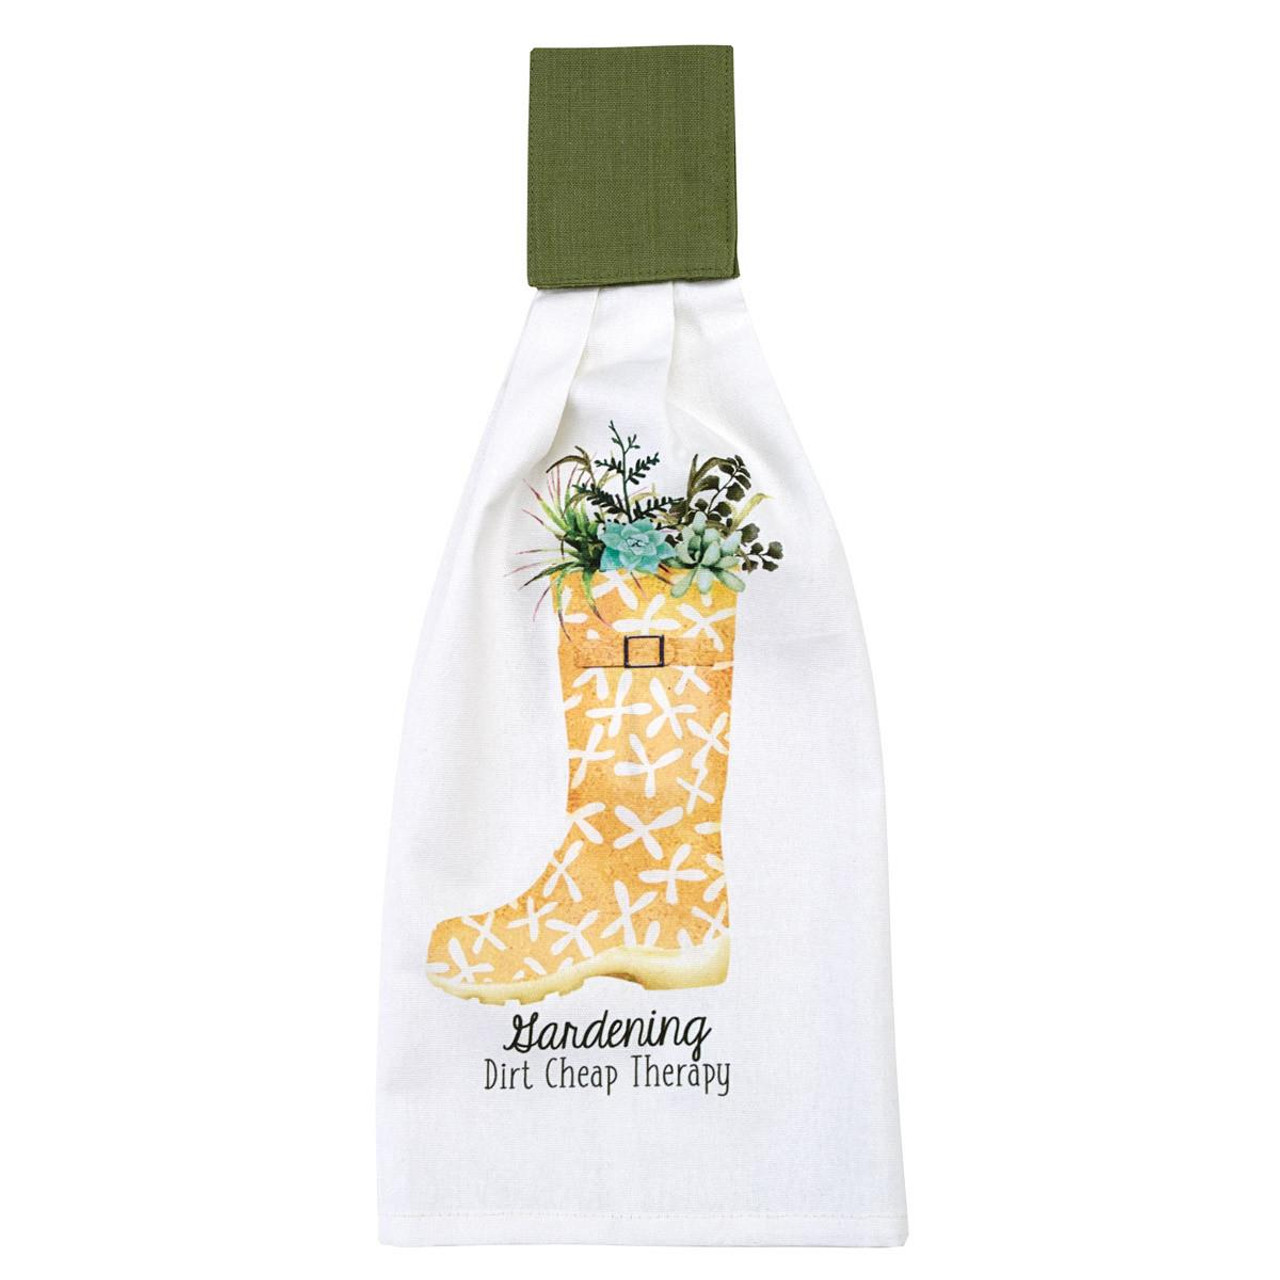 https://cdn11.bigcommerce.com/s-tfdhmk/images/stencil/1280x1280/products/22225/156508/Spring-Garden-Hand-Towels-Set-of-2-762242038776_image1__88496.1667564585.jpg?c=2